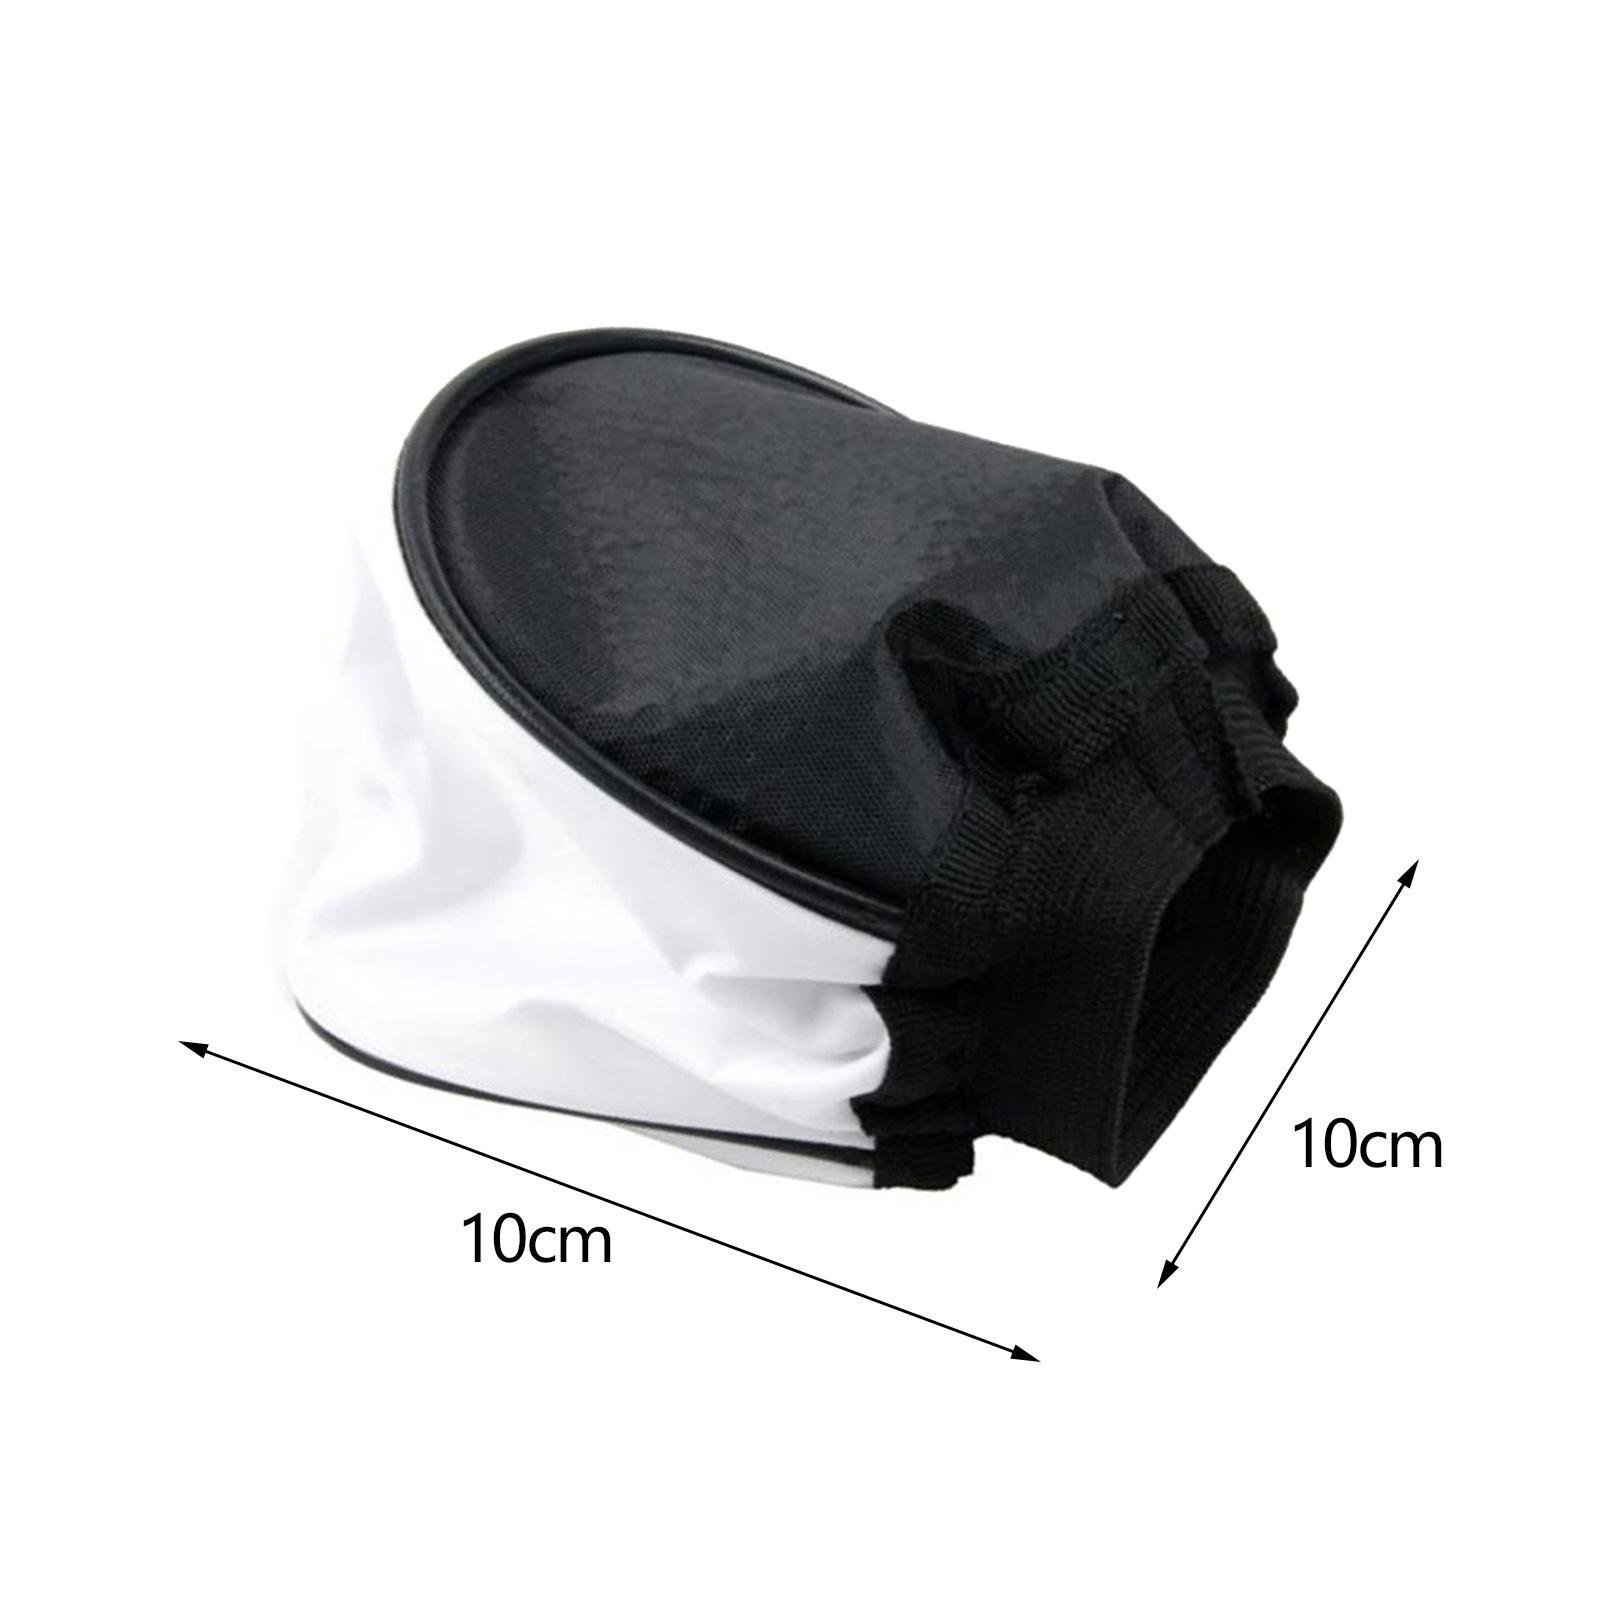 Flash Light Softbox Durable Photography Flash Lens Diffuser for DSLR Cameras